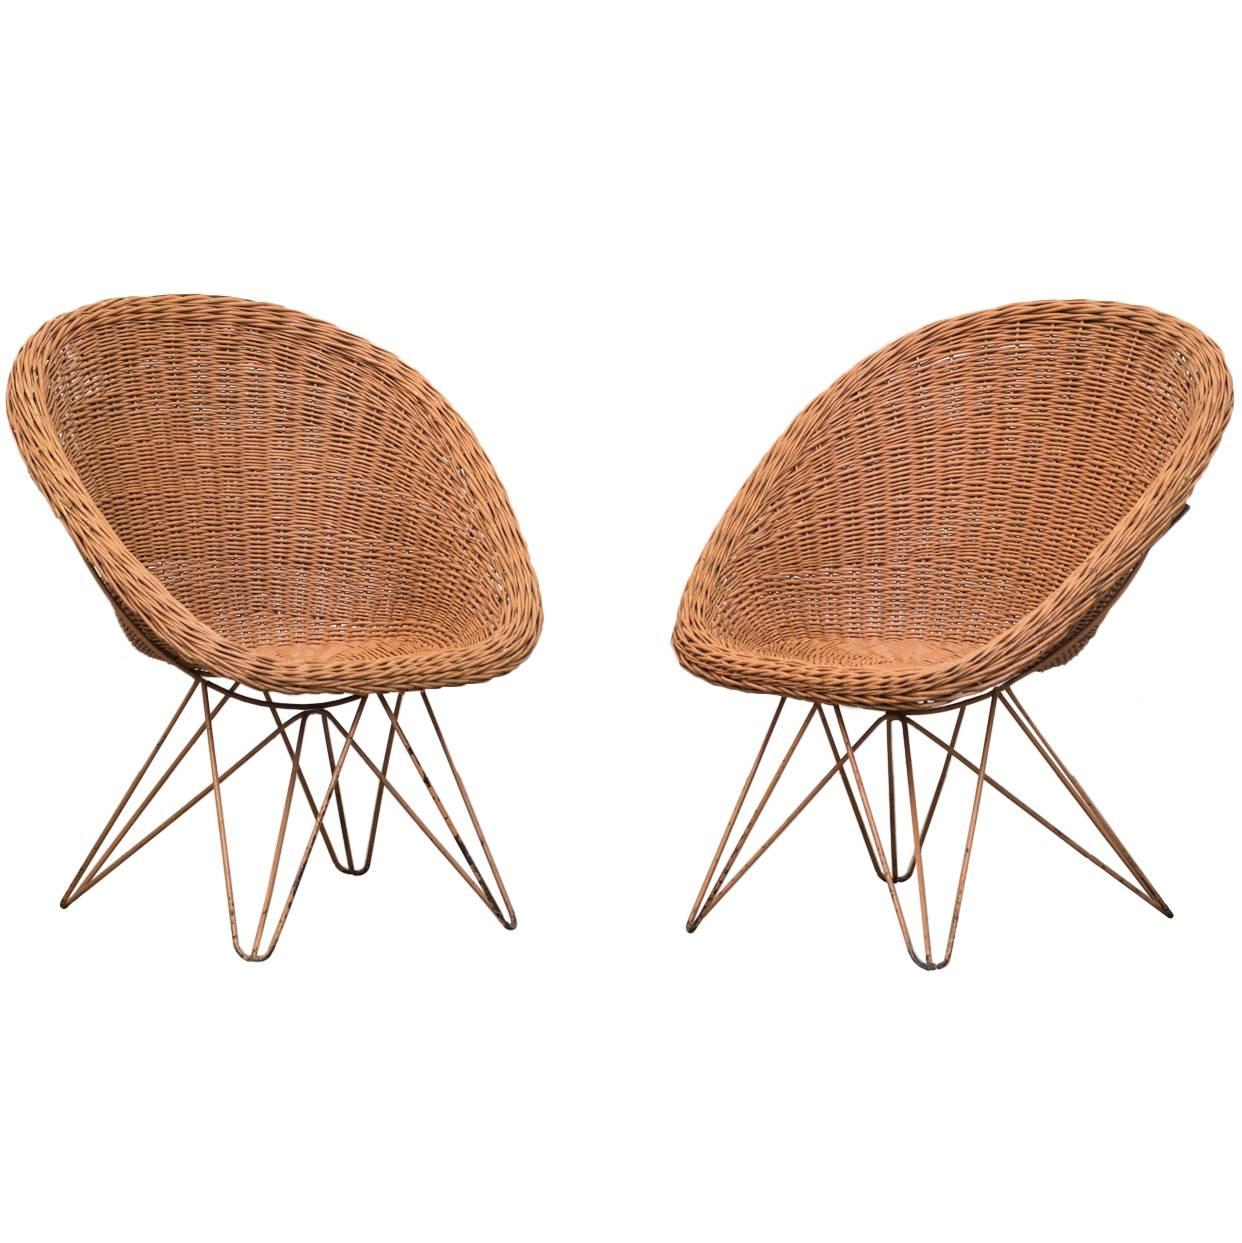 Pair of Jacques Adnet Style Bamboo Chairs in Mauve